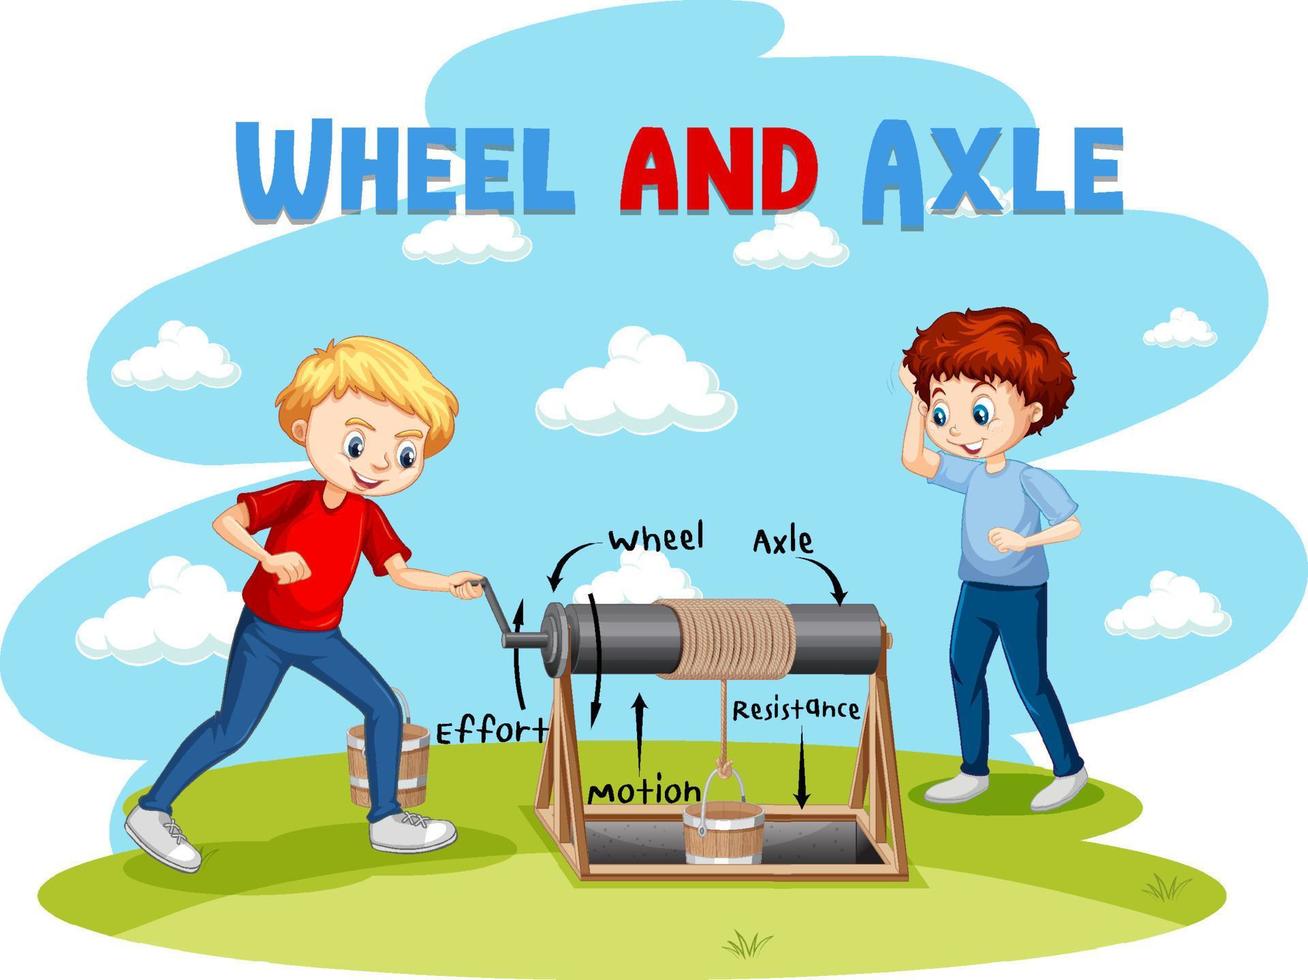 Wheel and axle experiment with two boys vector